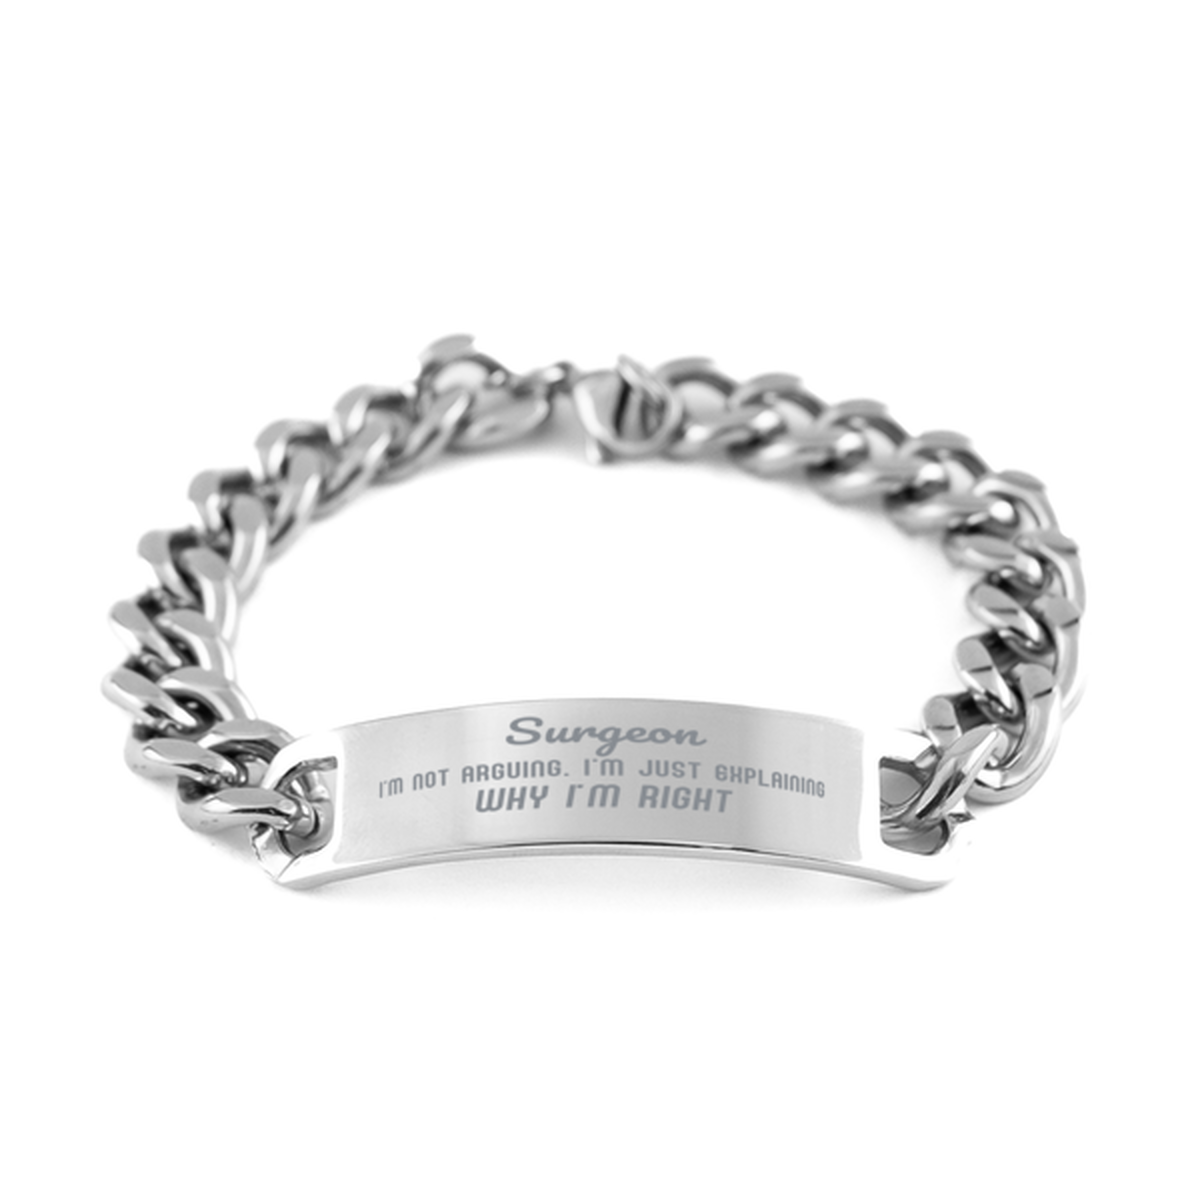 Surgeon I'm not Arguing. I'm Just Explaining Why I'm RIGHT Cuban Chain Stainless Steel Bracelet, Graduation Birthday Christmas Surgeon Gifts For Surgeon Funny Saying Quote Present for Men Women Coworker